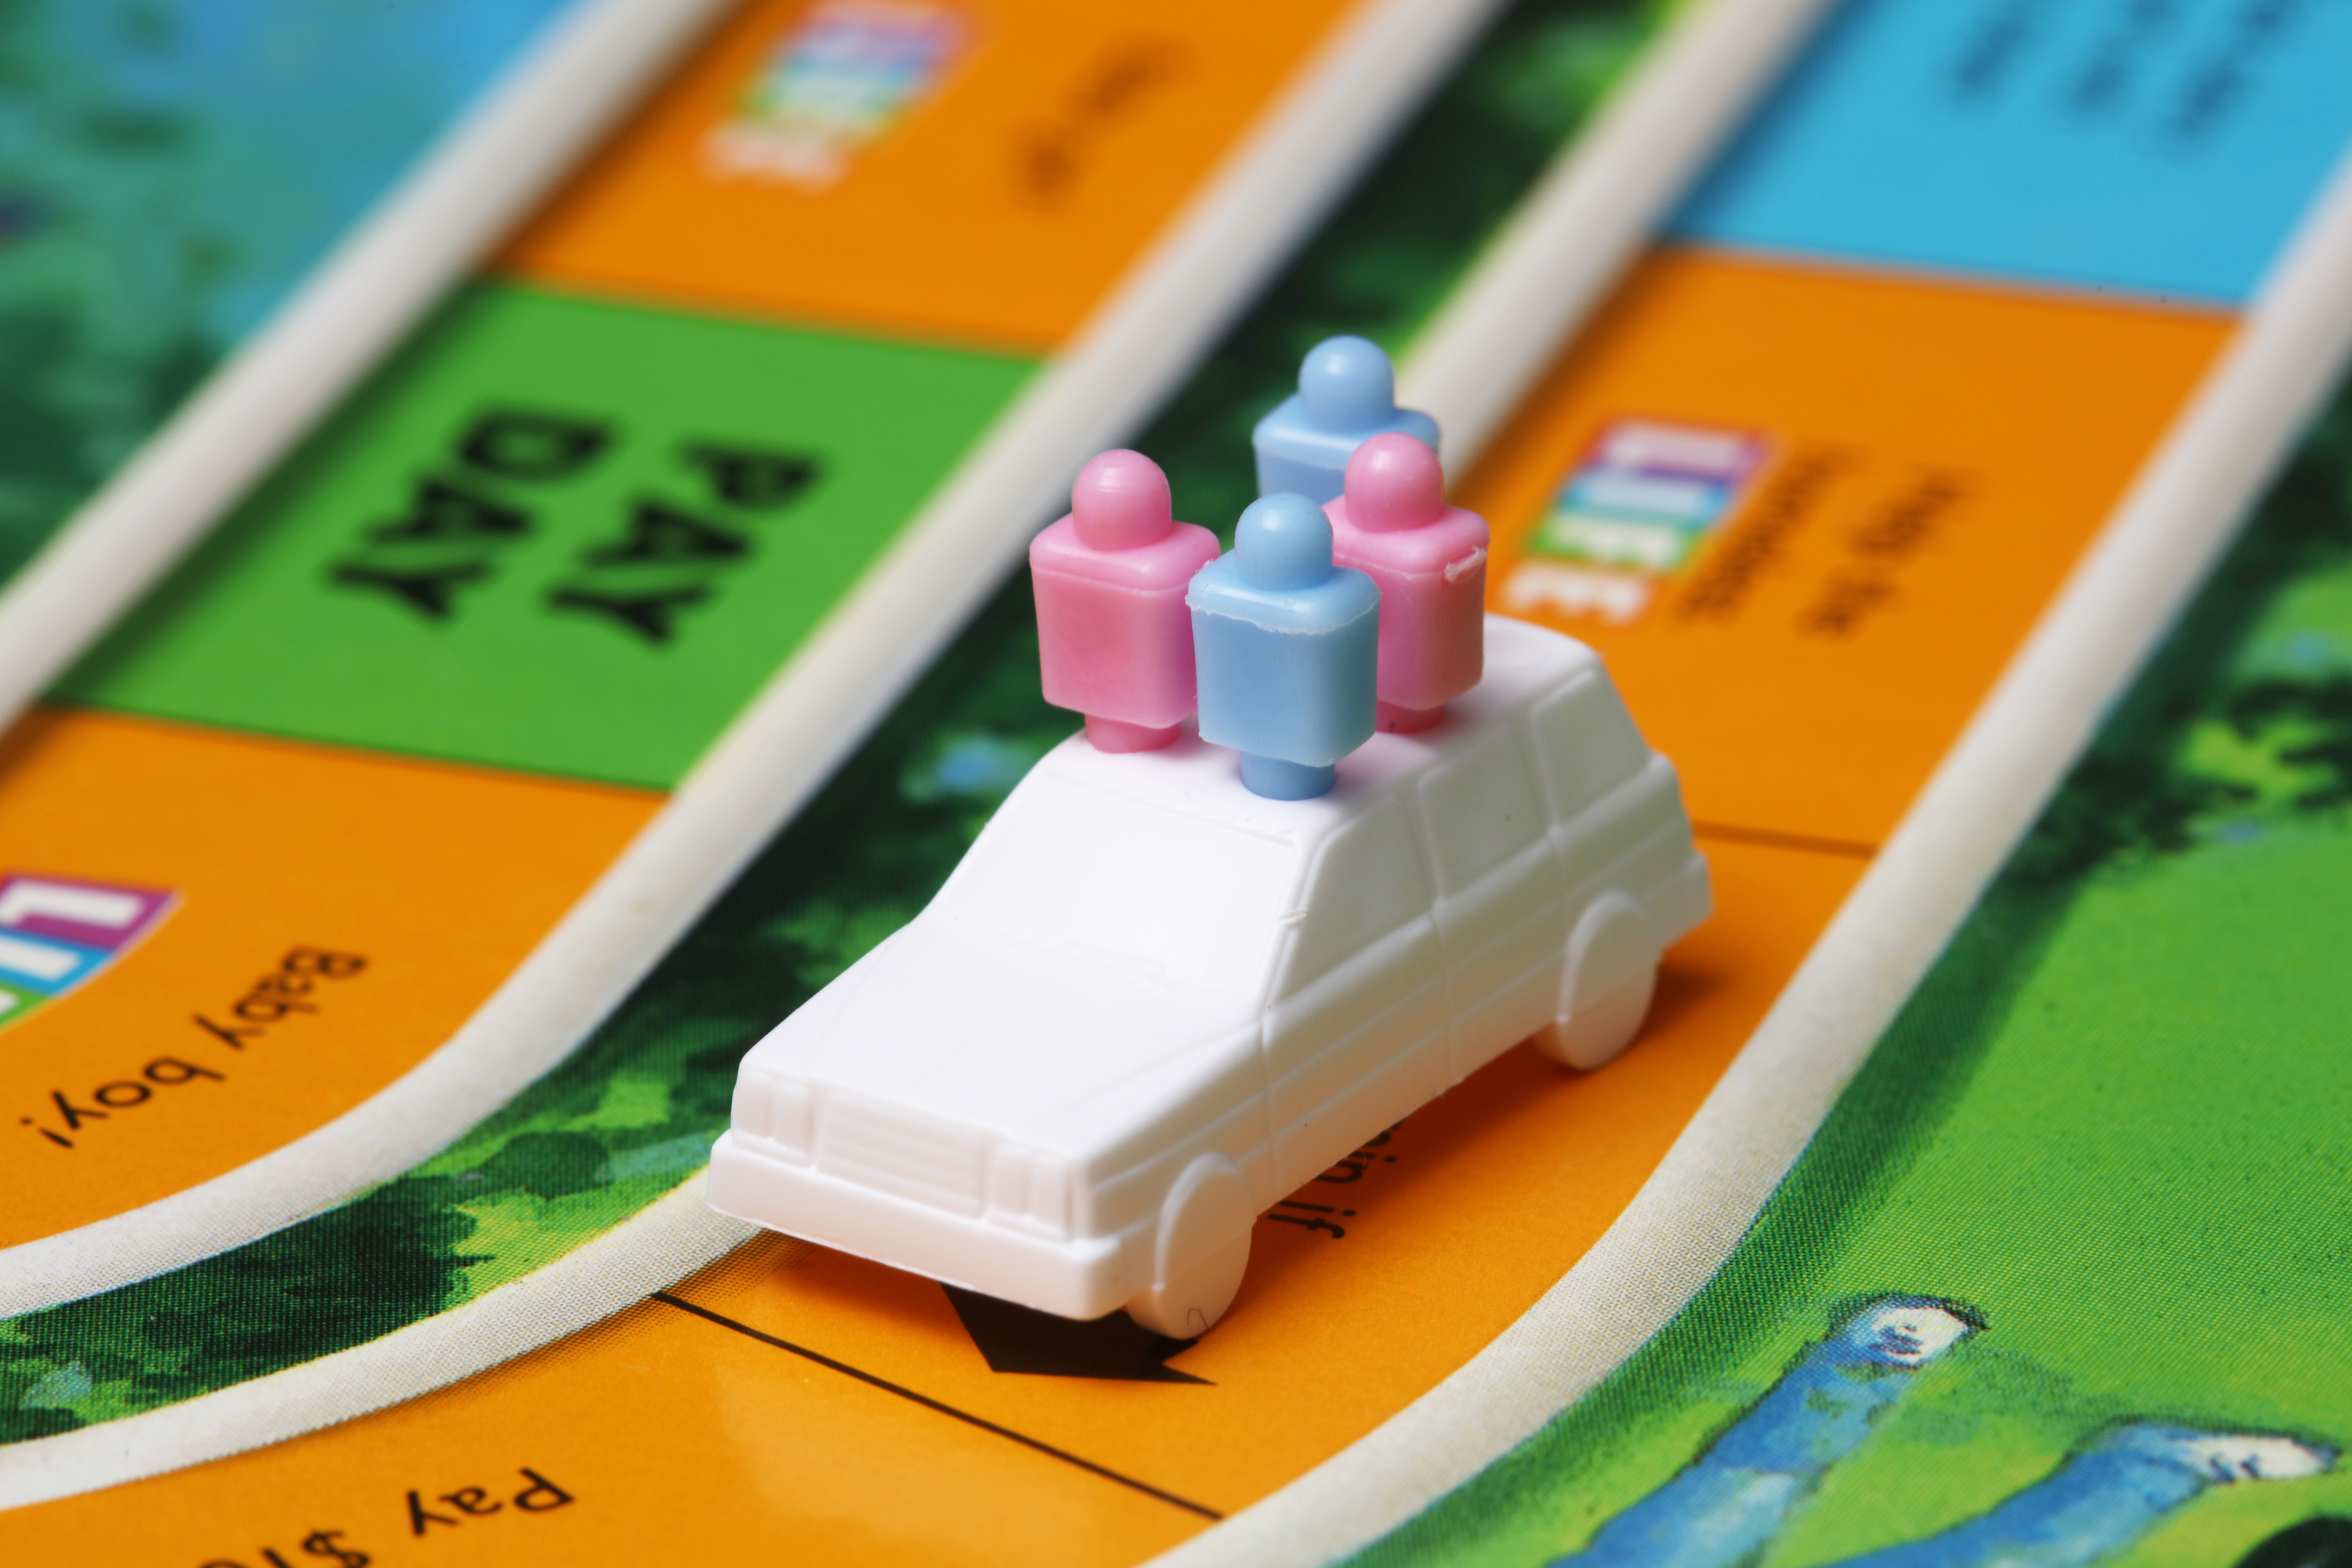 Close up of the board game Life with white plastic car with peg people inside.